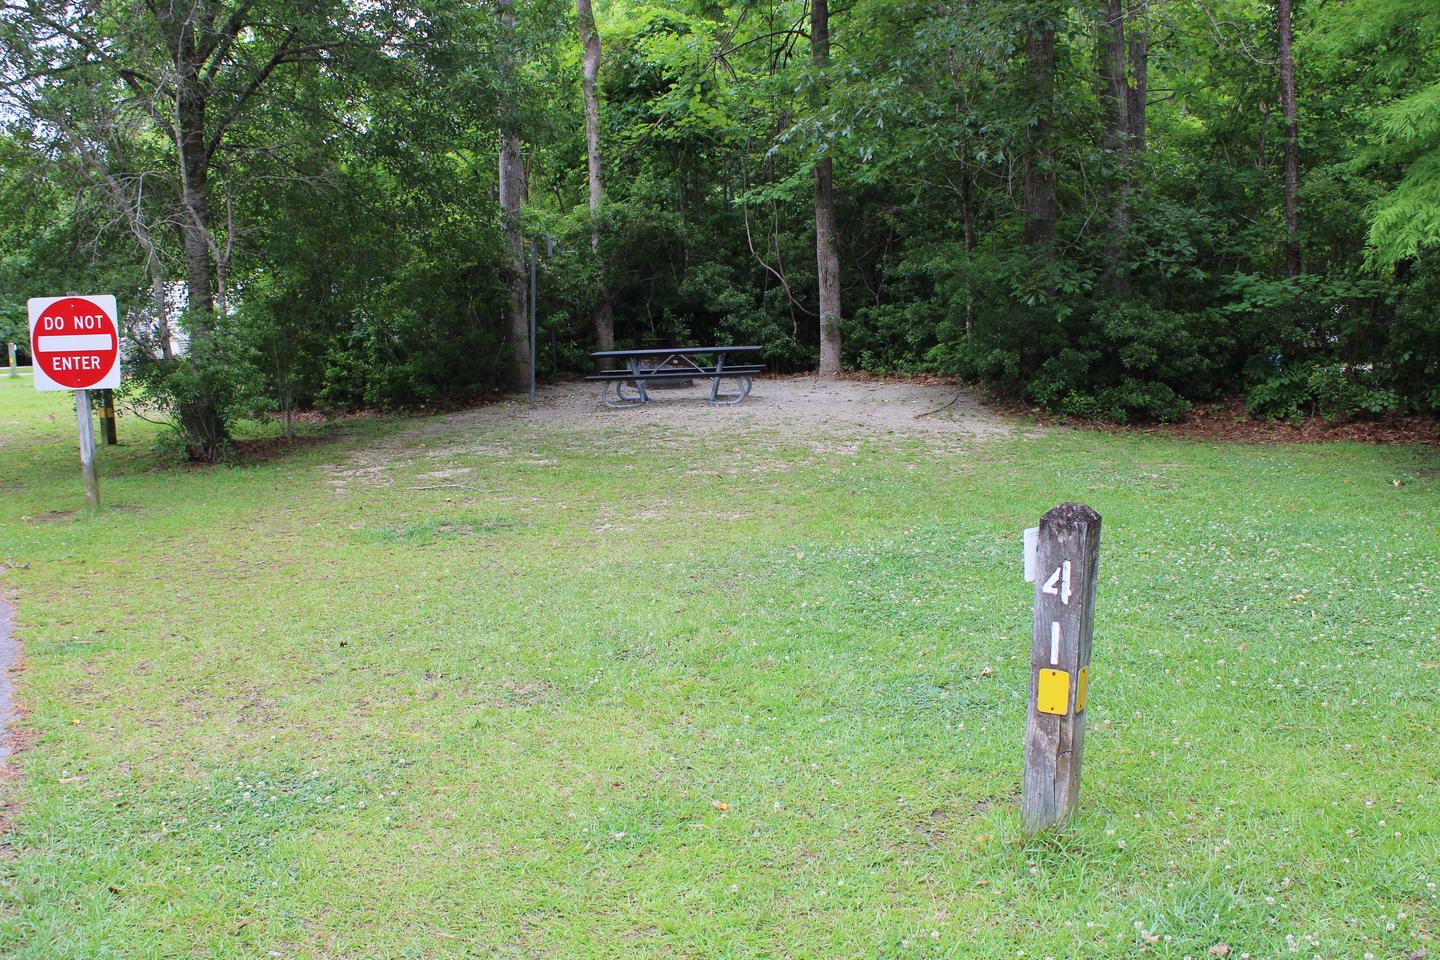 Flanners Beach Campsite #41.Driveway to Campsite